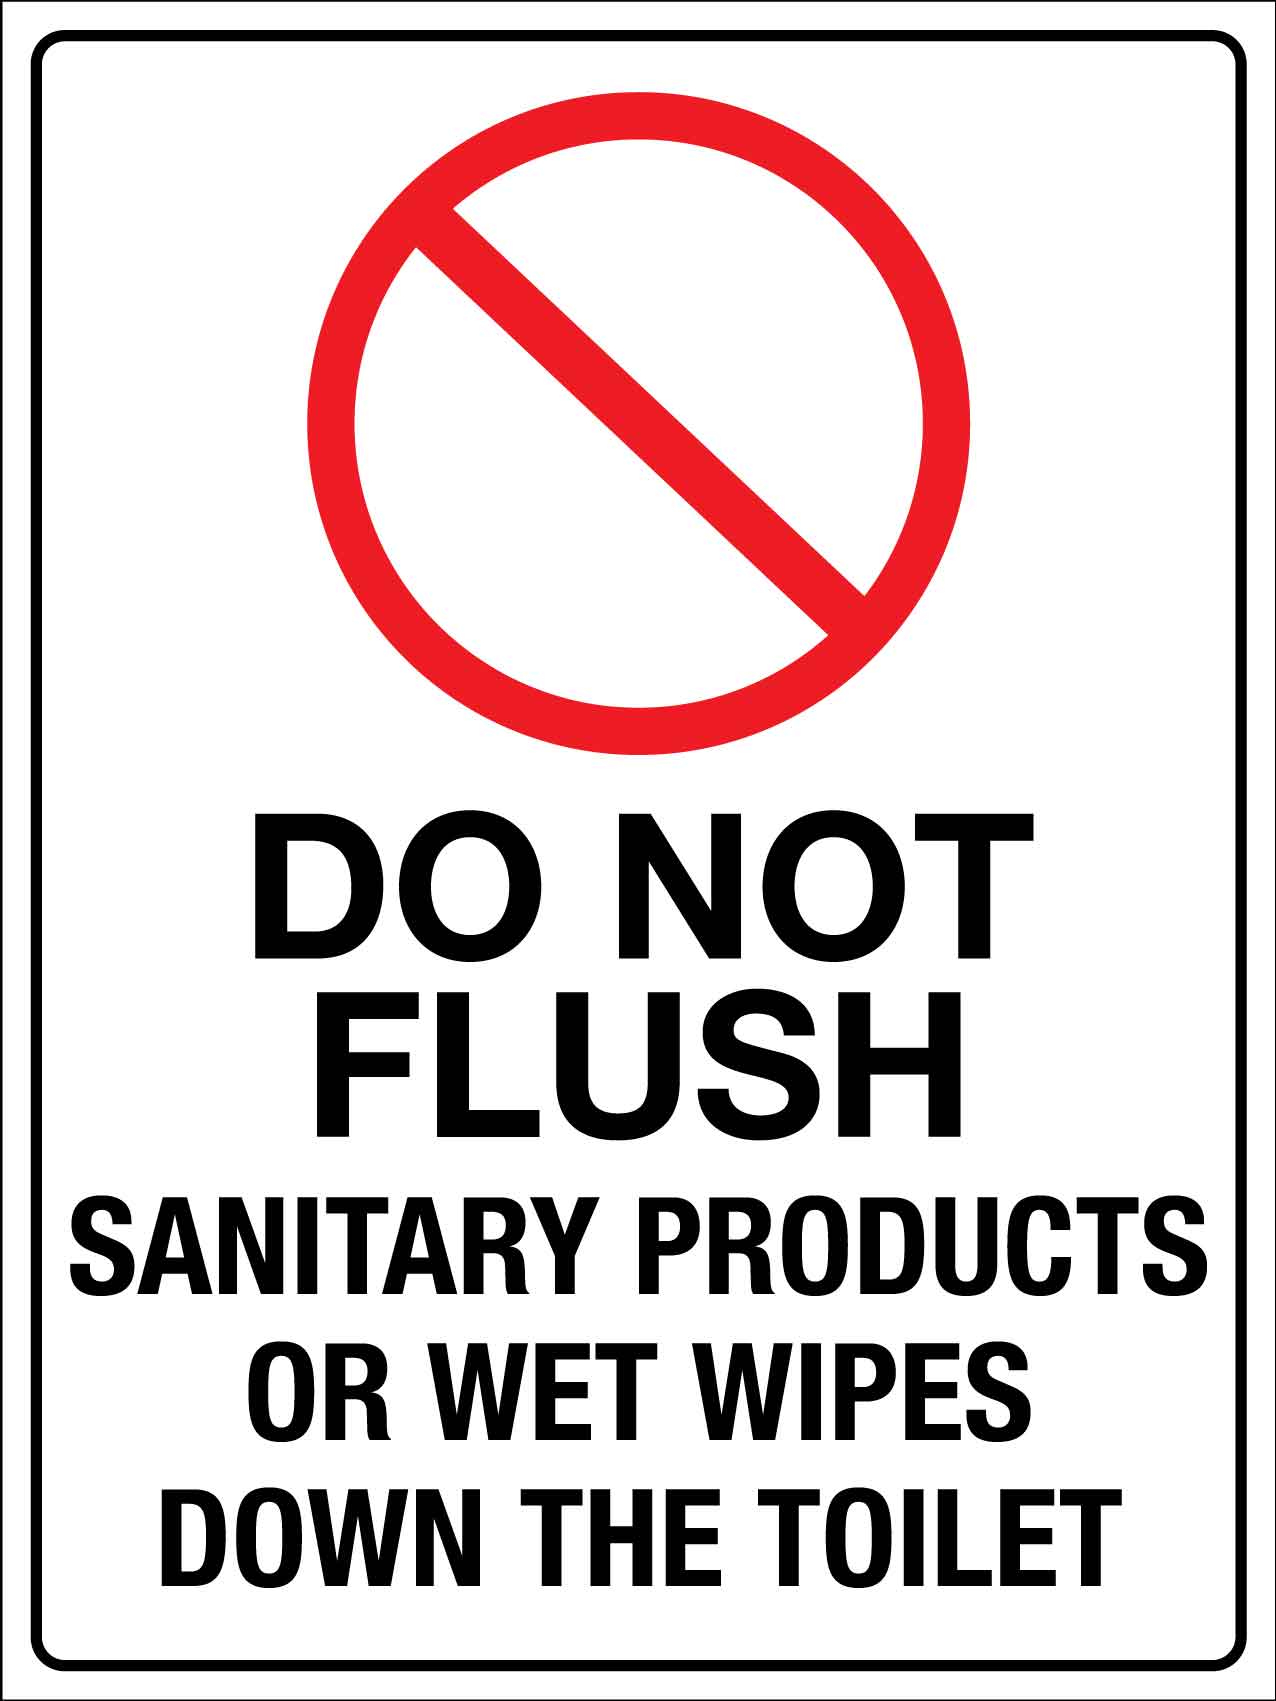 Do Not Flush Sanitary Products Or Wet Wipes Down The Toilet Sign